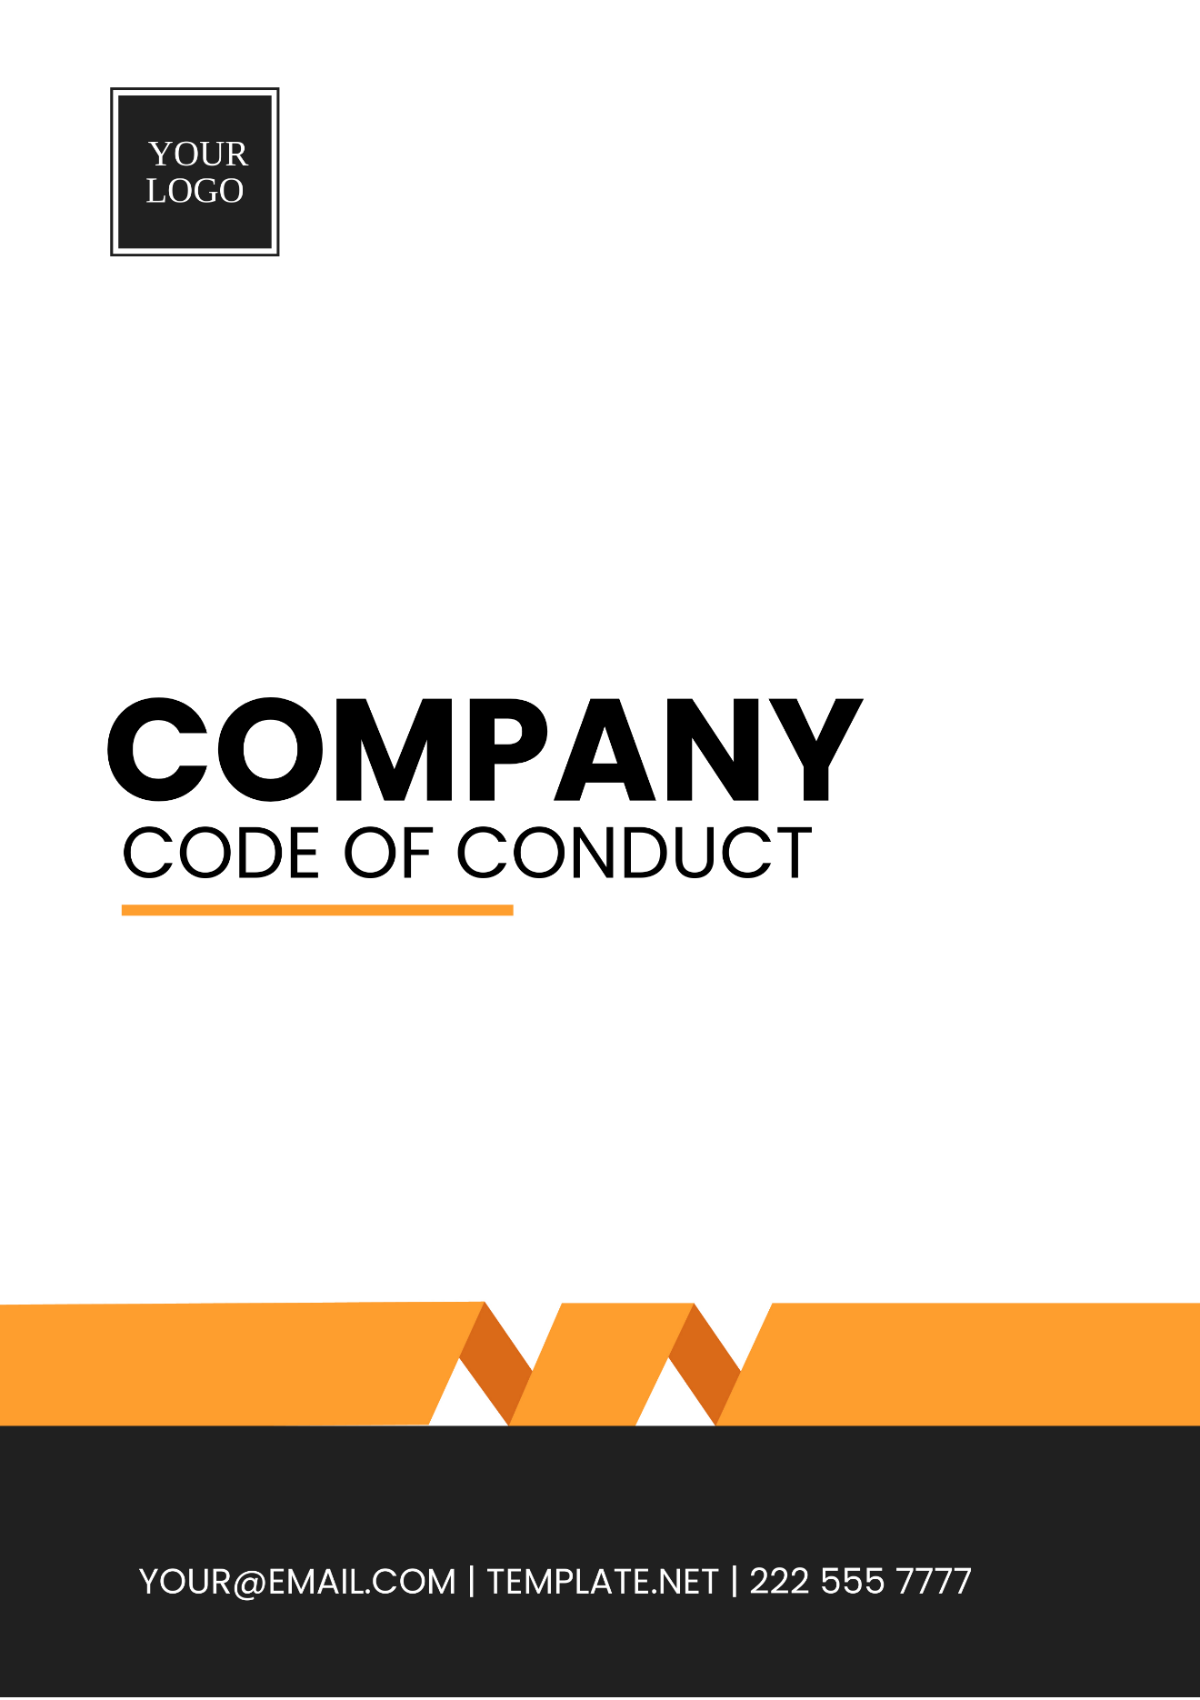 Company Code of Conduct Template